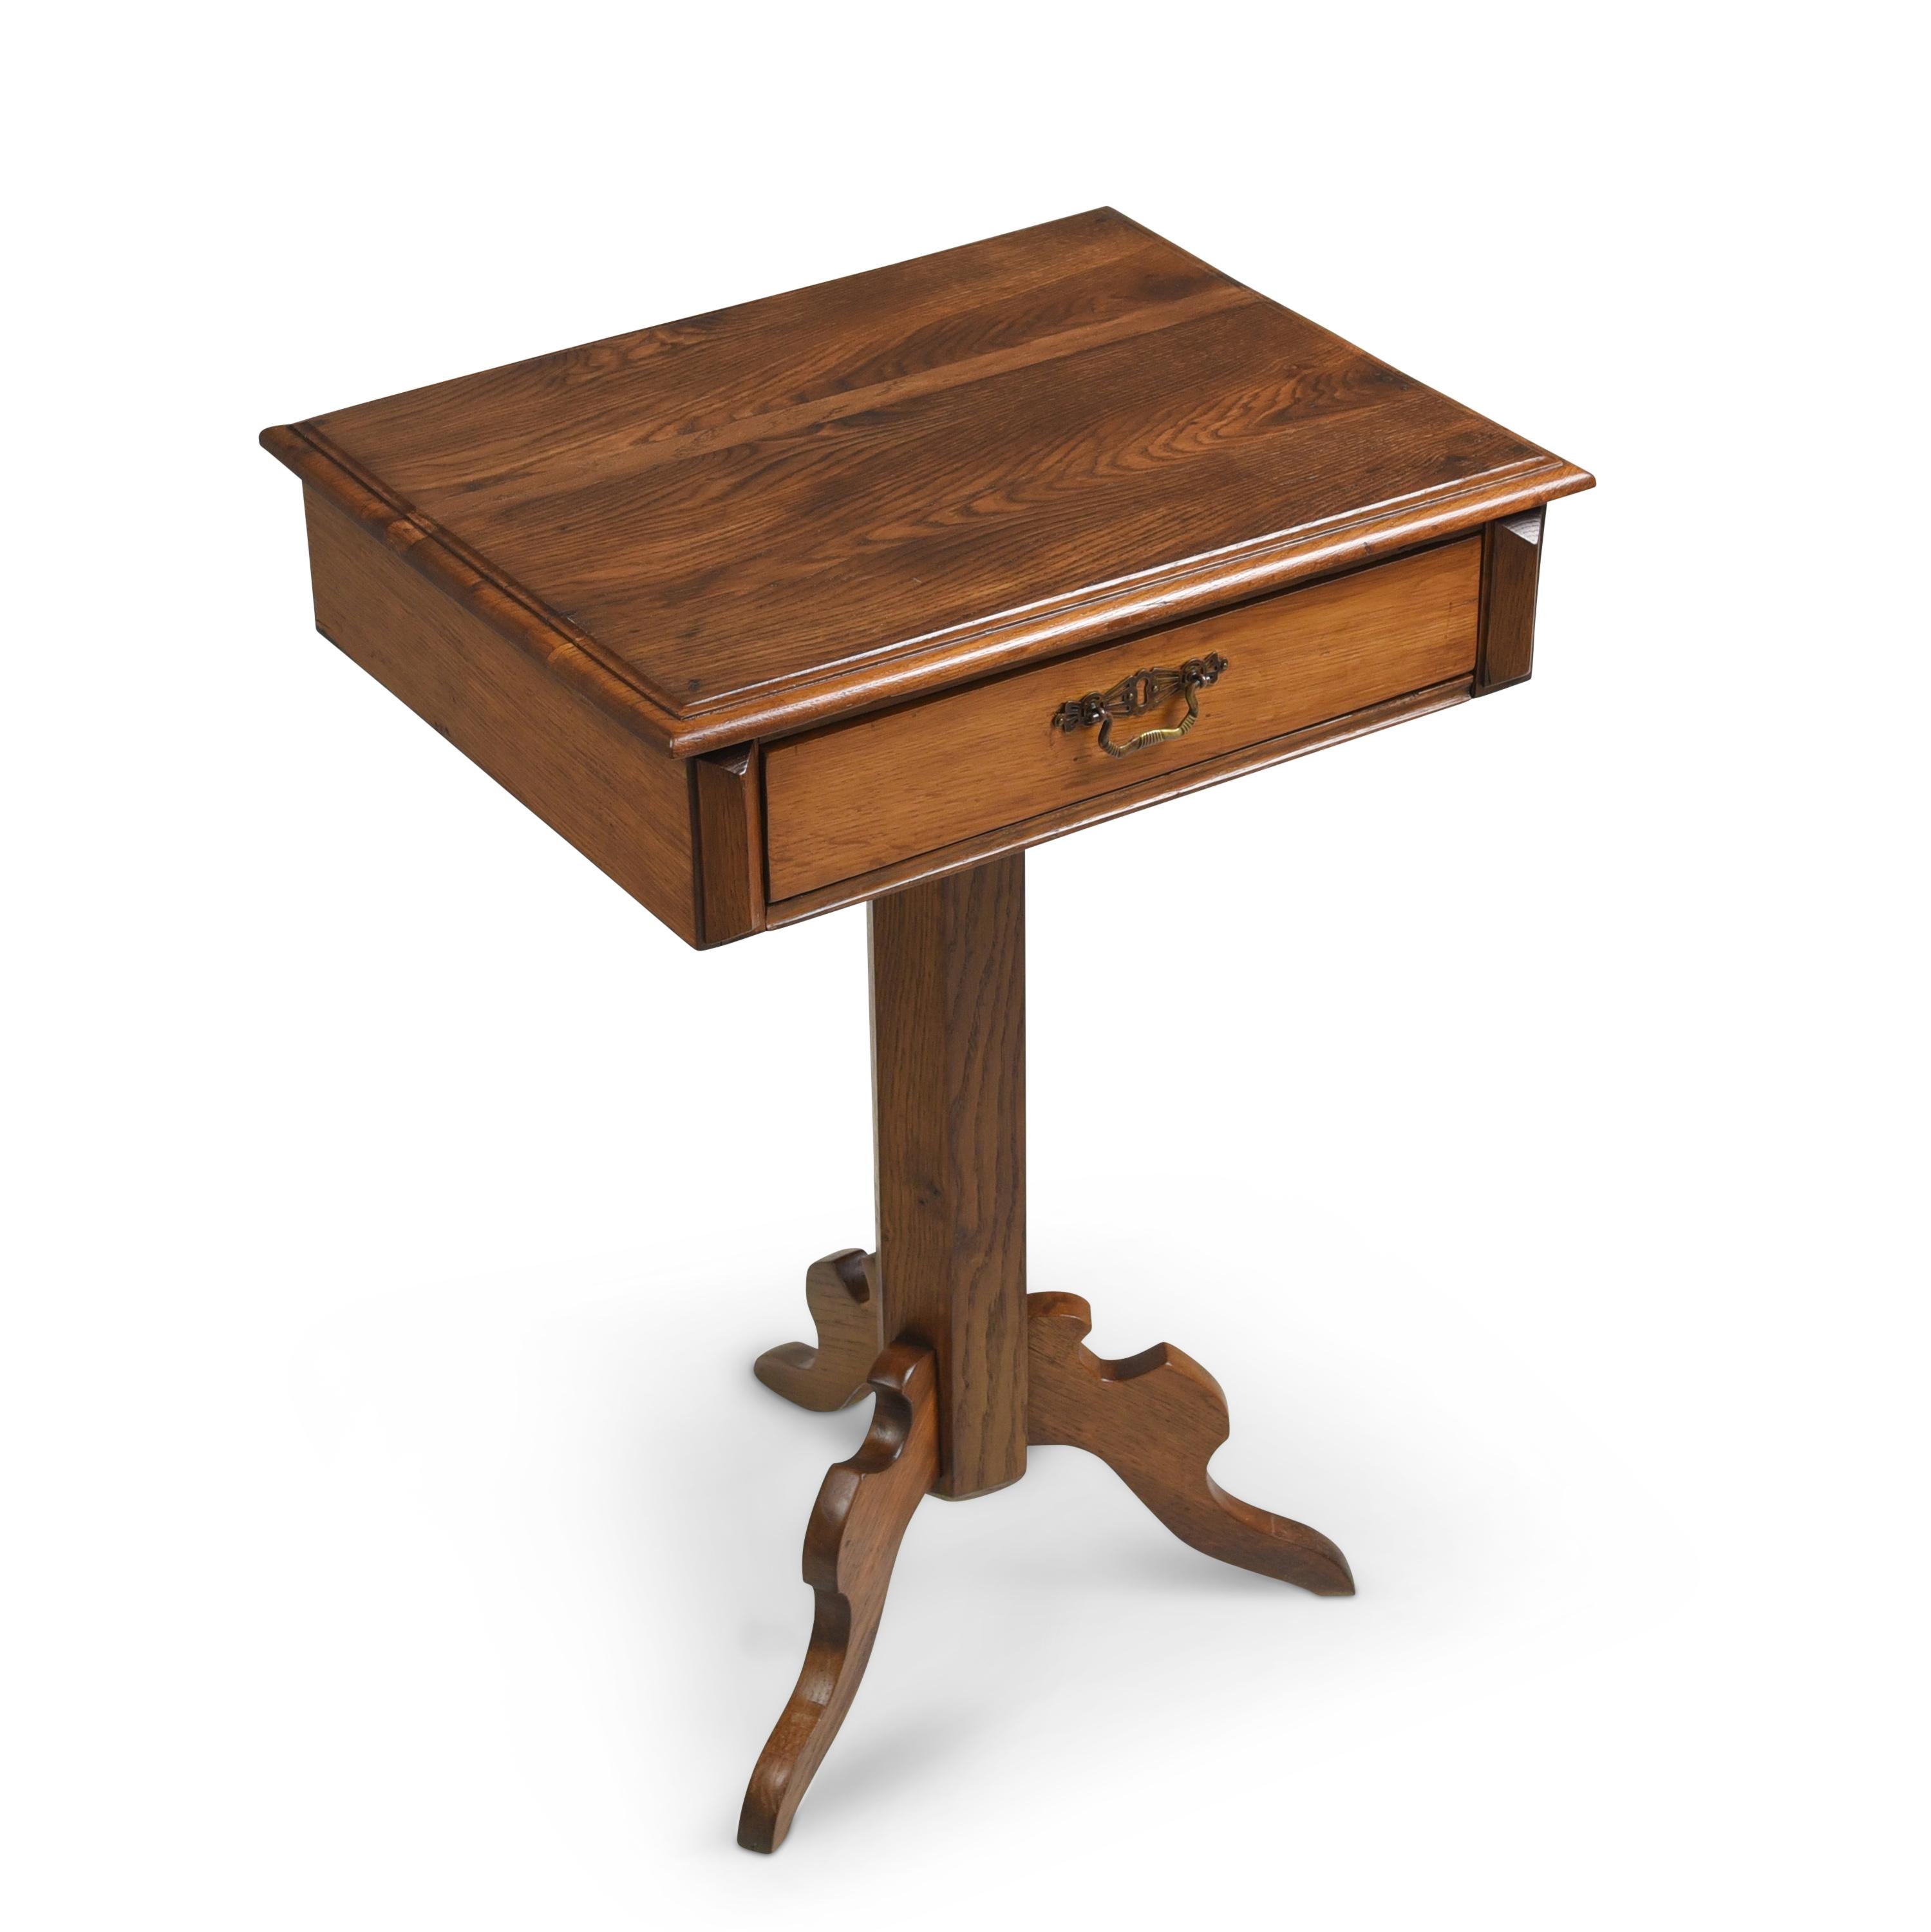 Side table with drawer restored Gründerzeit around 1900 oak pedestal

Features:
Chest of drawers on a hexagonal pedestal leg with 3 curved feet
Very nice patina
Drawer pronged
High quality brass fittings
Attractive model

Additional